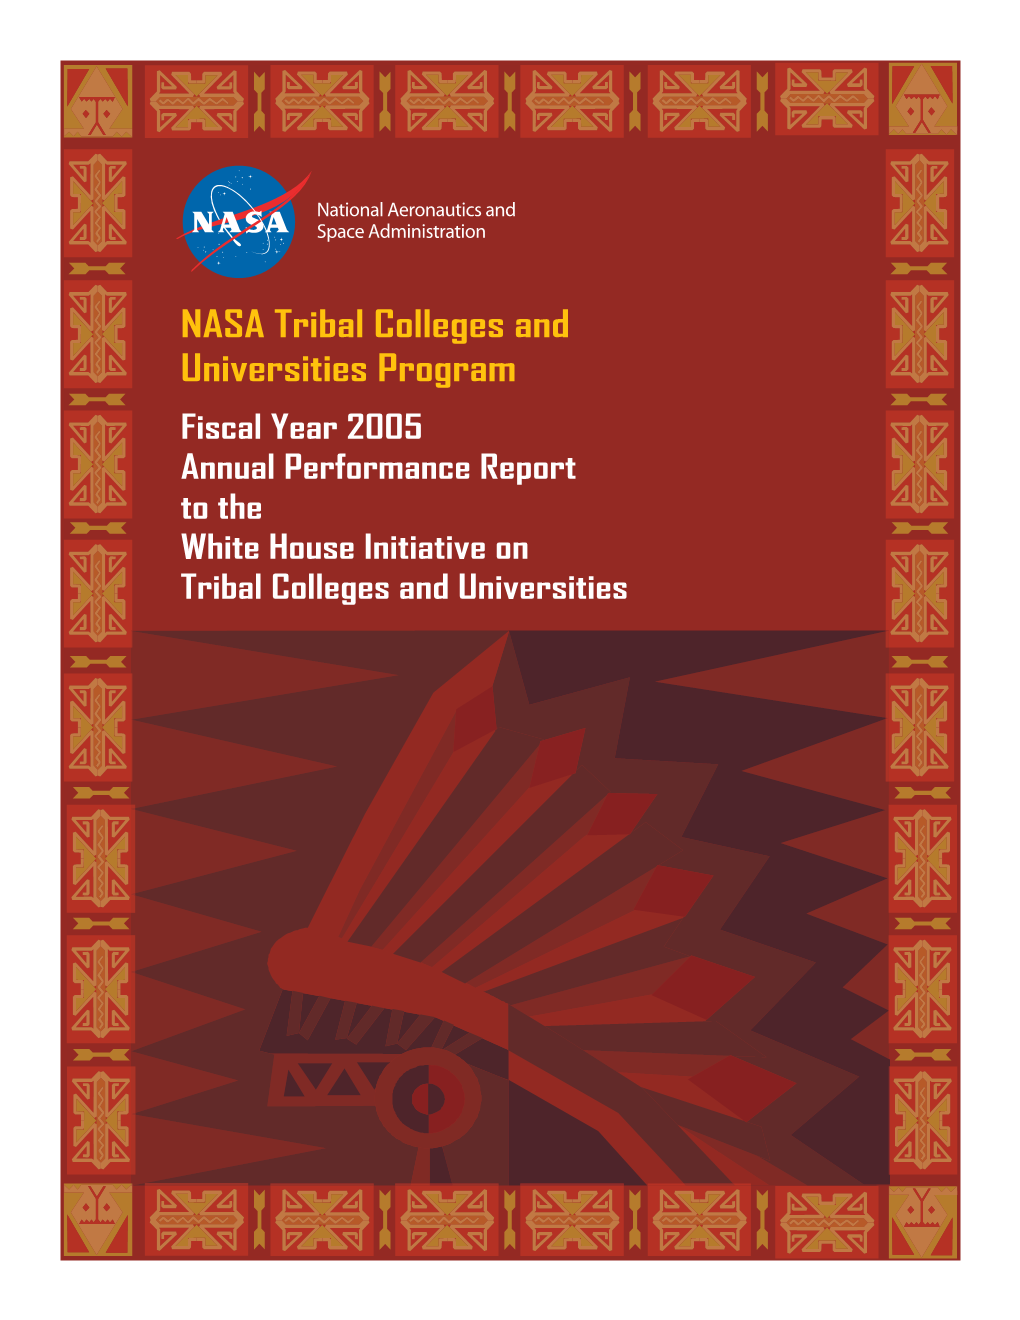 NASA Tribal Colleges and Universities Program Fiscal Year 2005 Annual Performance Report to the White House Initiative on Tribal Colleges and Universities